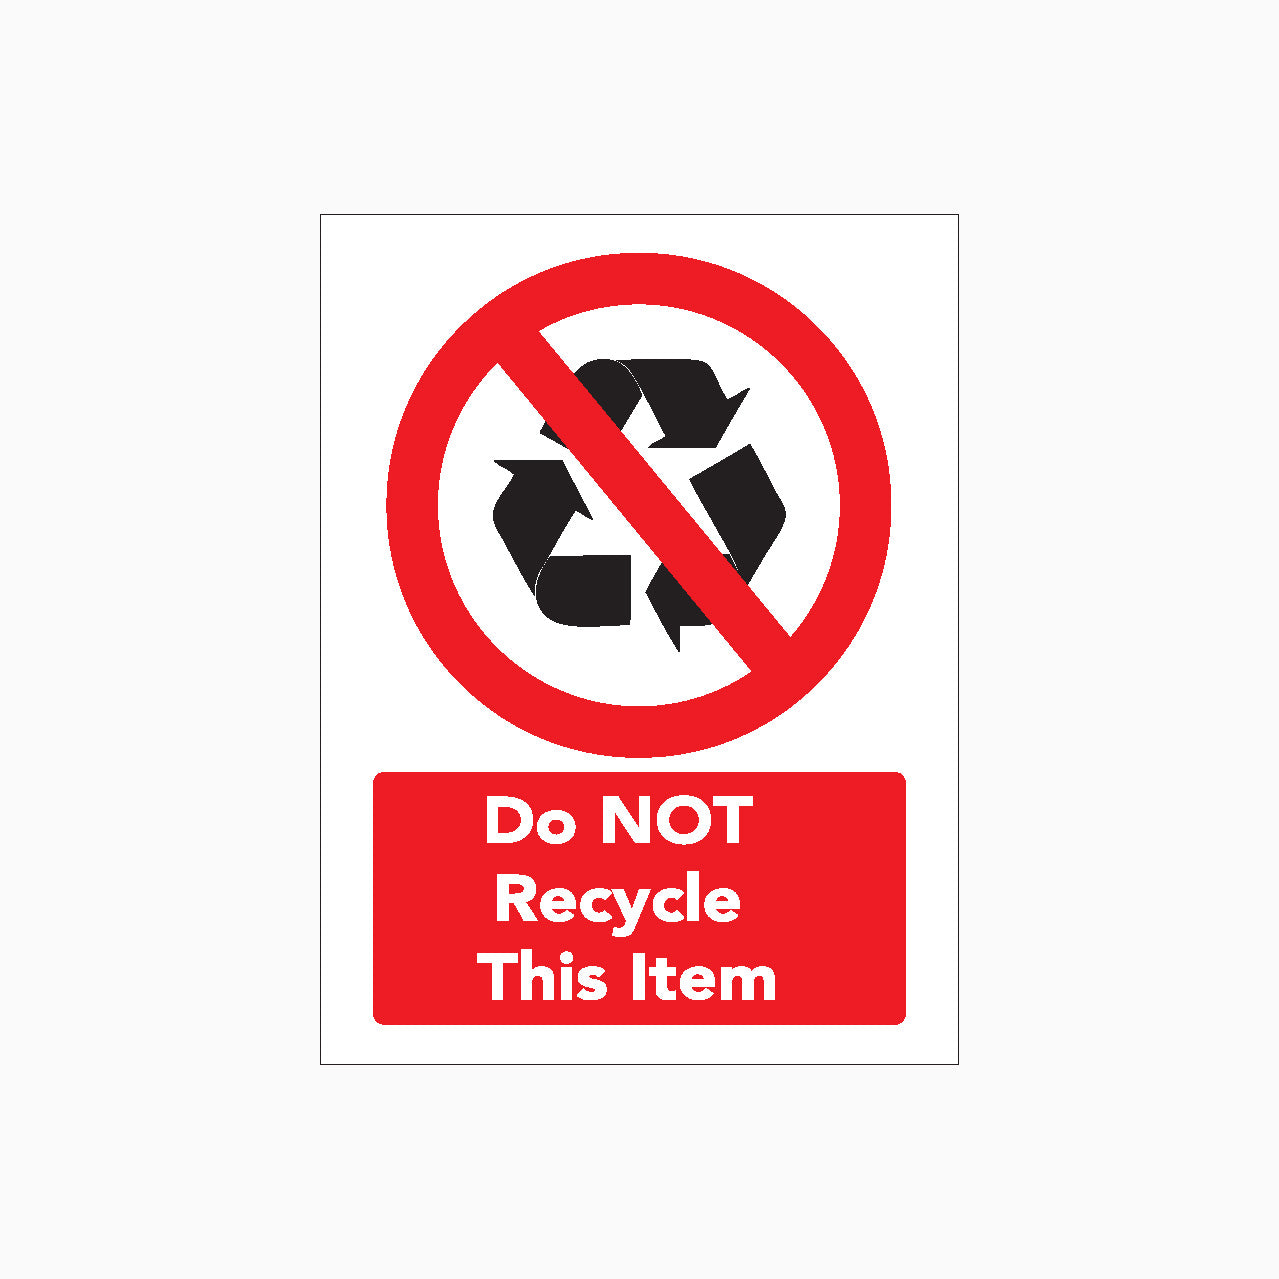 PROHIBITION SIGN - DO NOT RECYCLE THIS ITEM SIGN